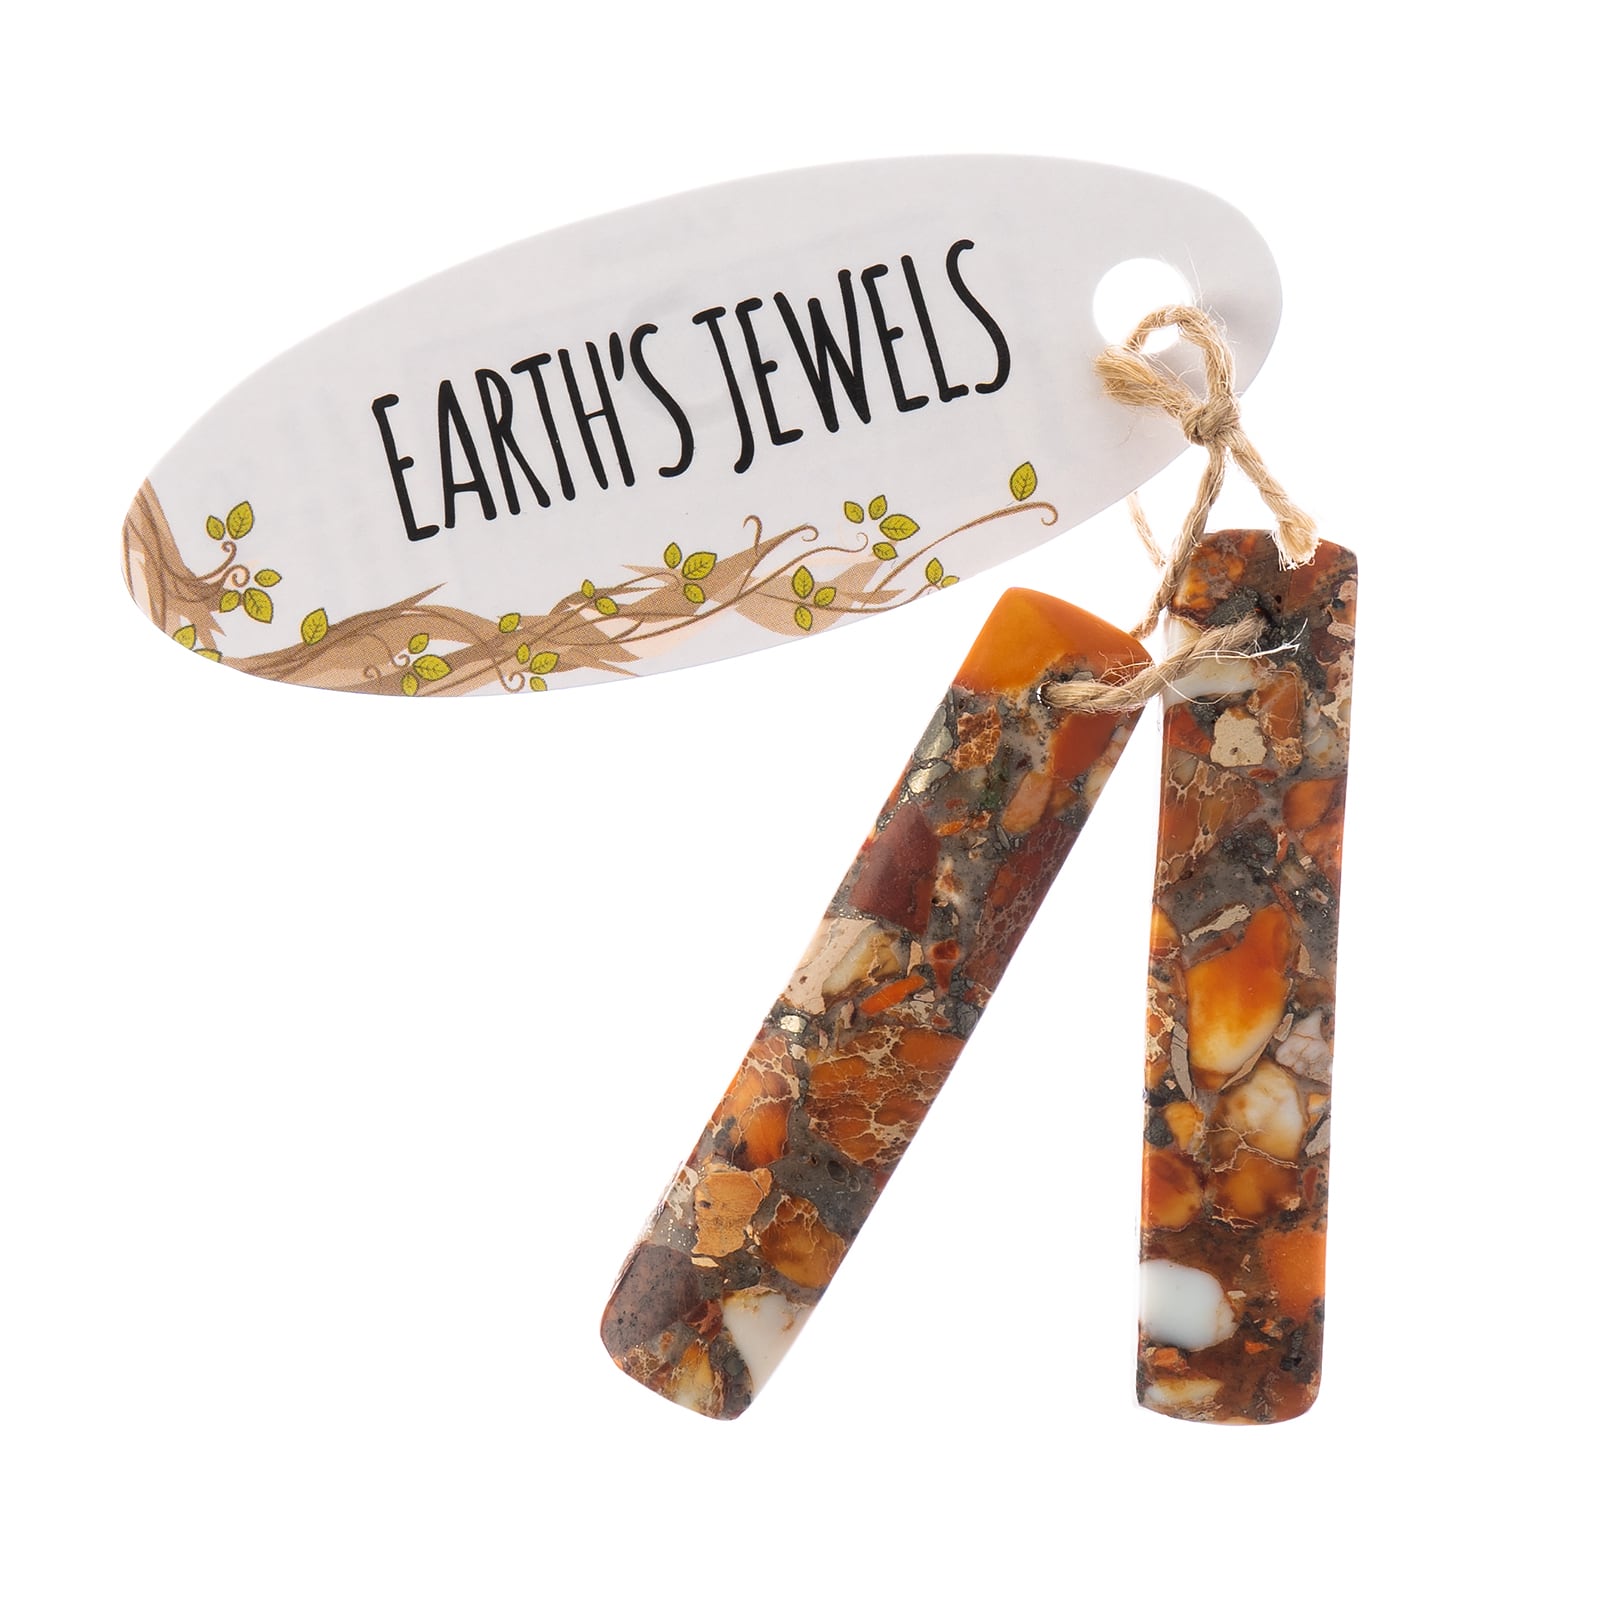 John Bead Earth’s Jewels Synthetic Imperial Jasper Rectangle Pendant Slices, 2ct.